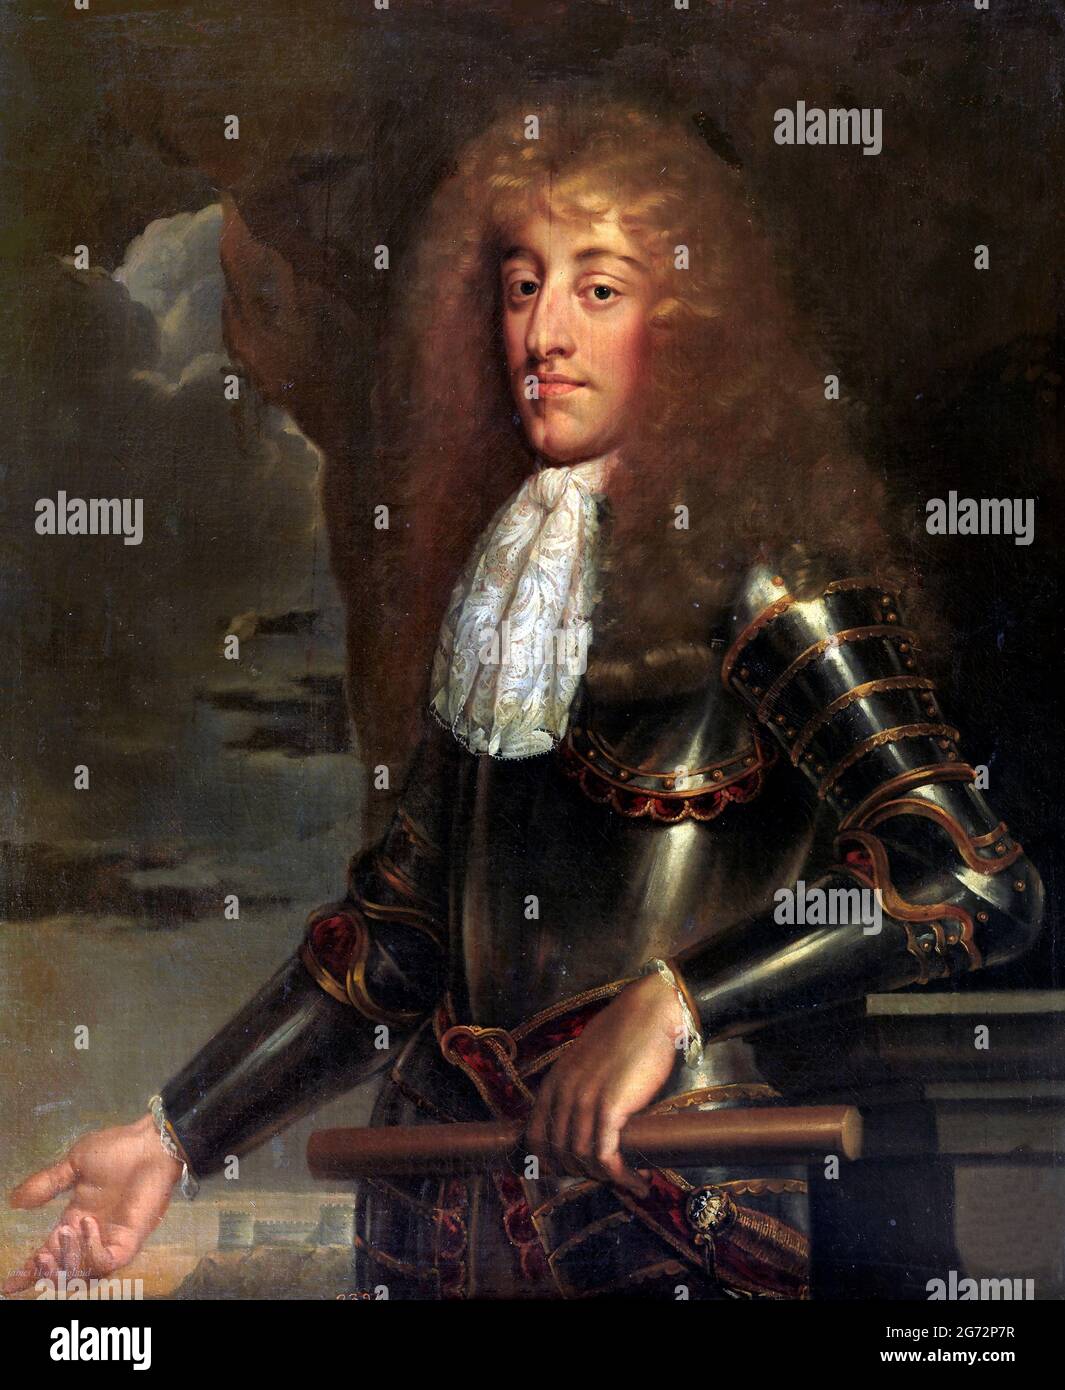 James II and VII (1633–1701). Portrait of King James II of England (King James VII of Scotland), oil on canvas, C. 1675-1700 Stock Photo